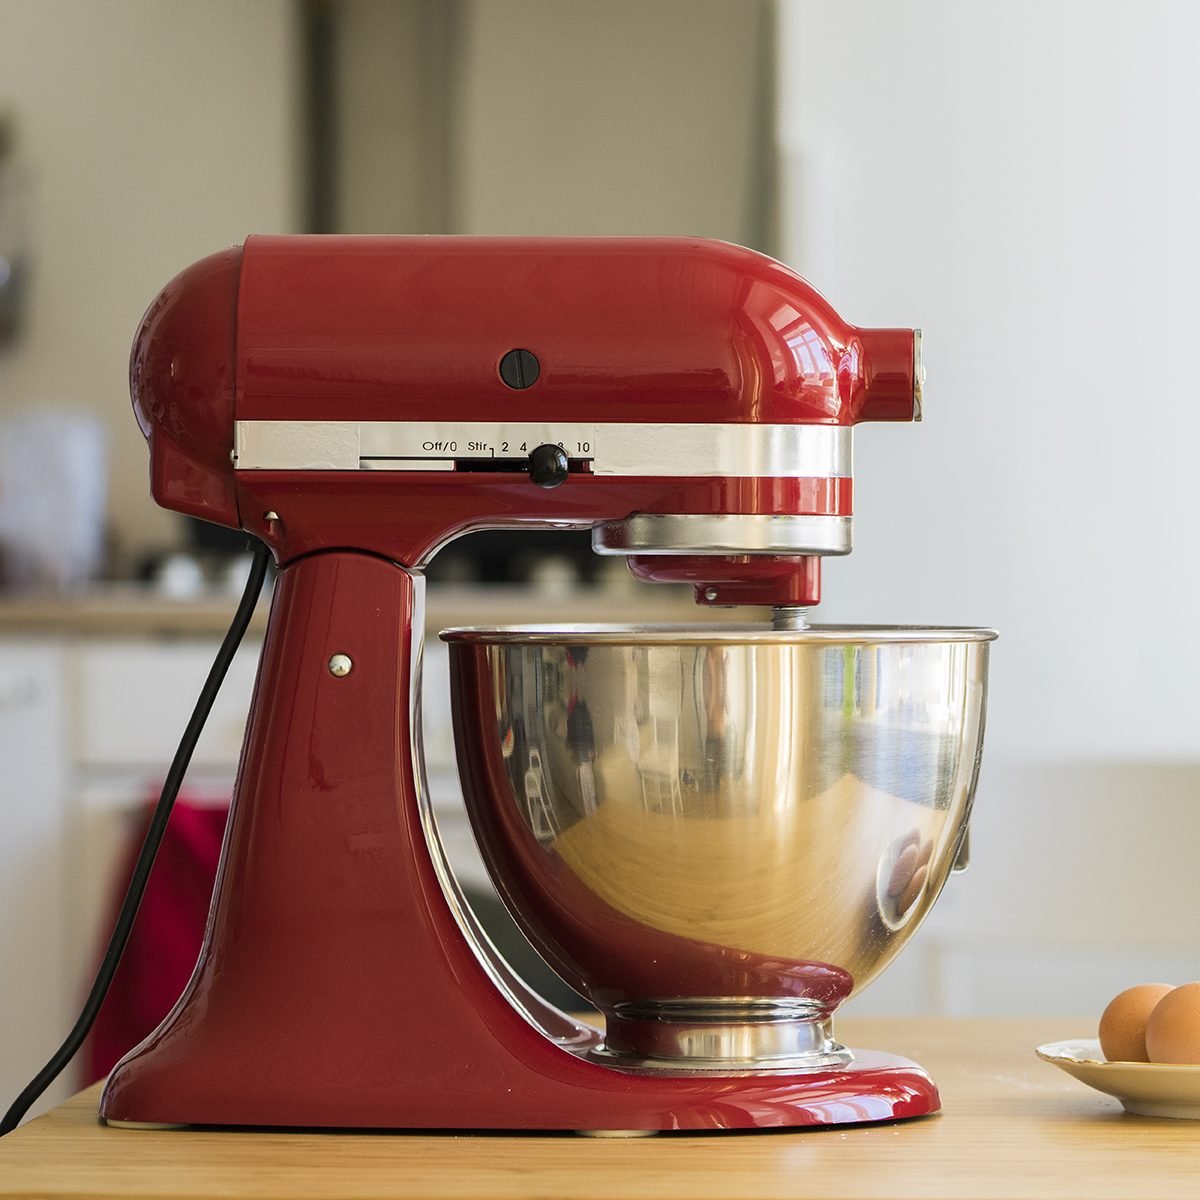 Types of KitchenAid Mixers: How to Choose the Best One